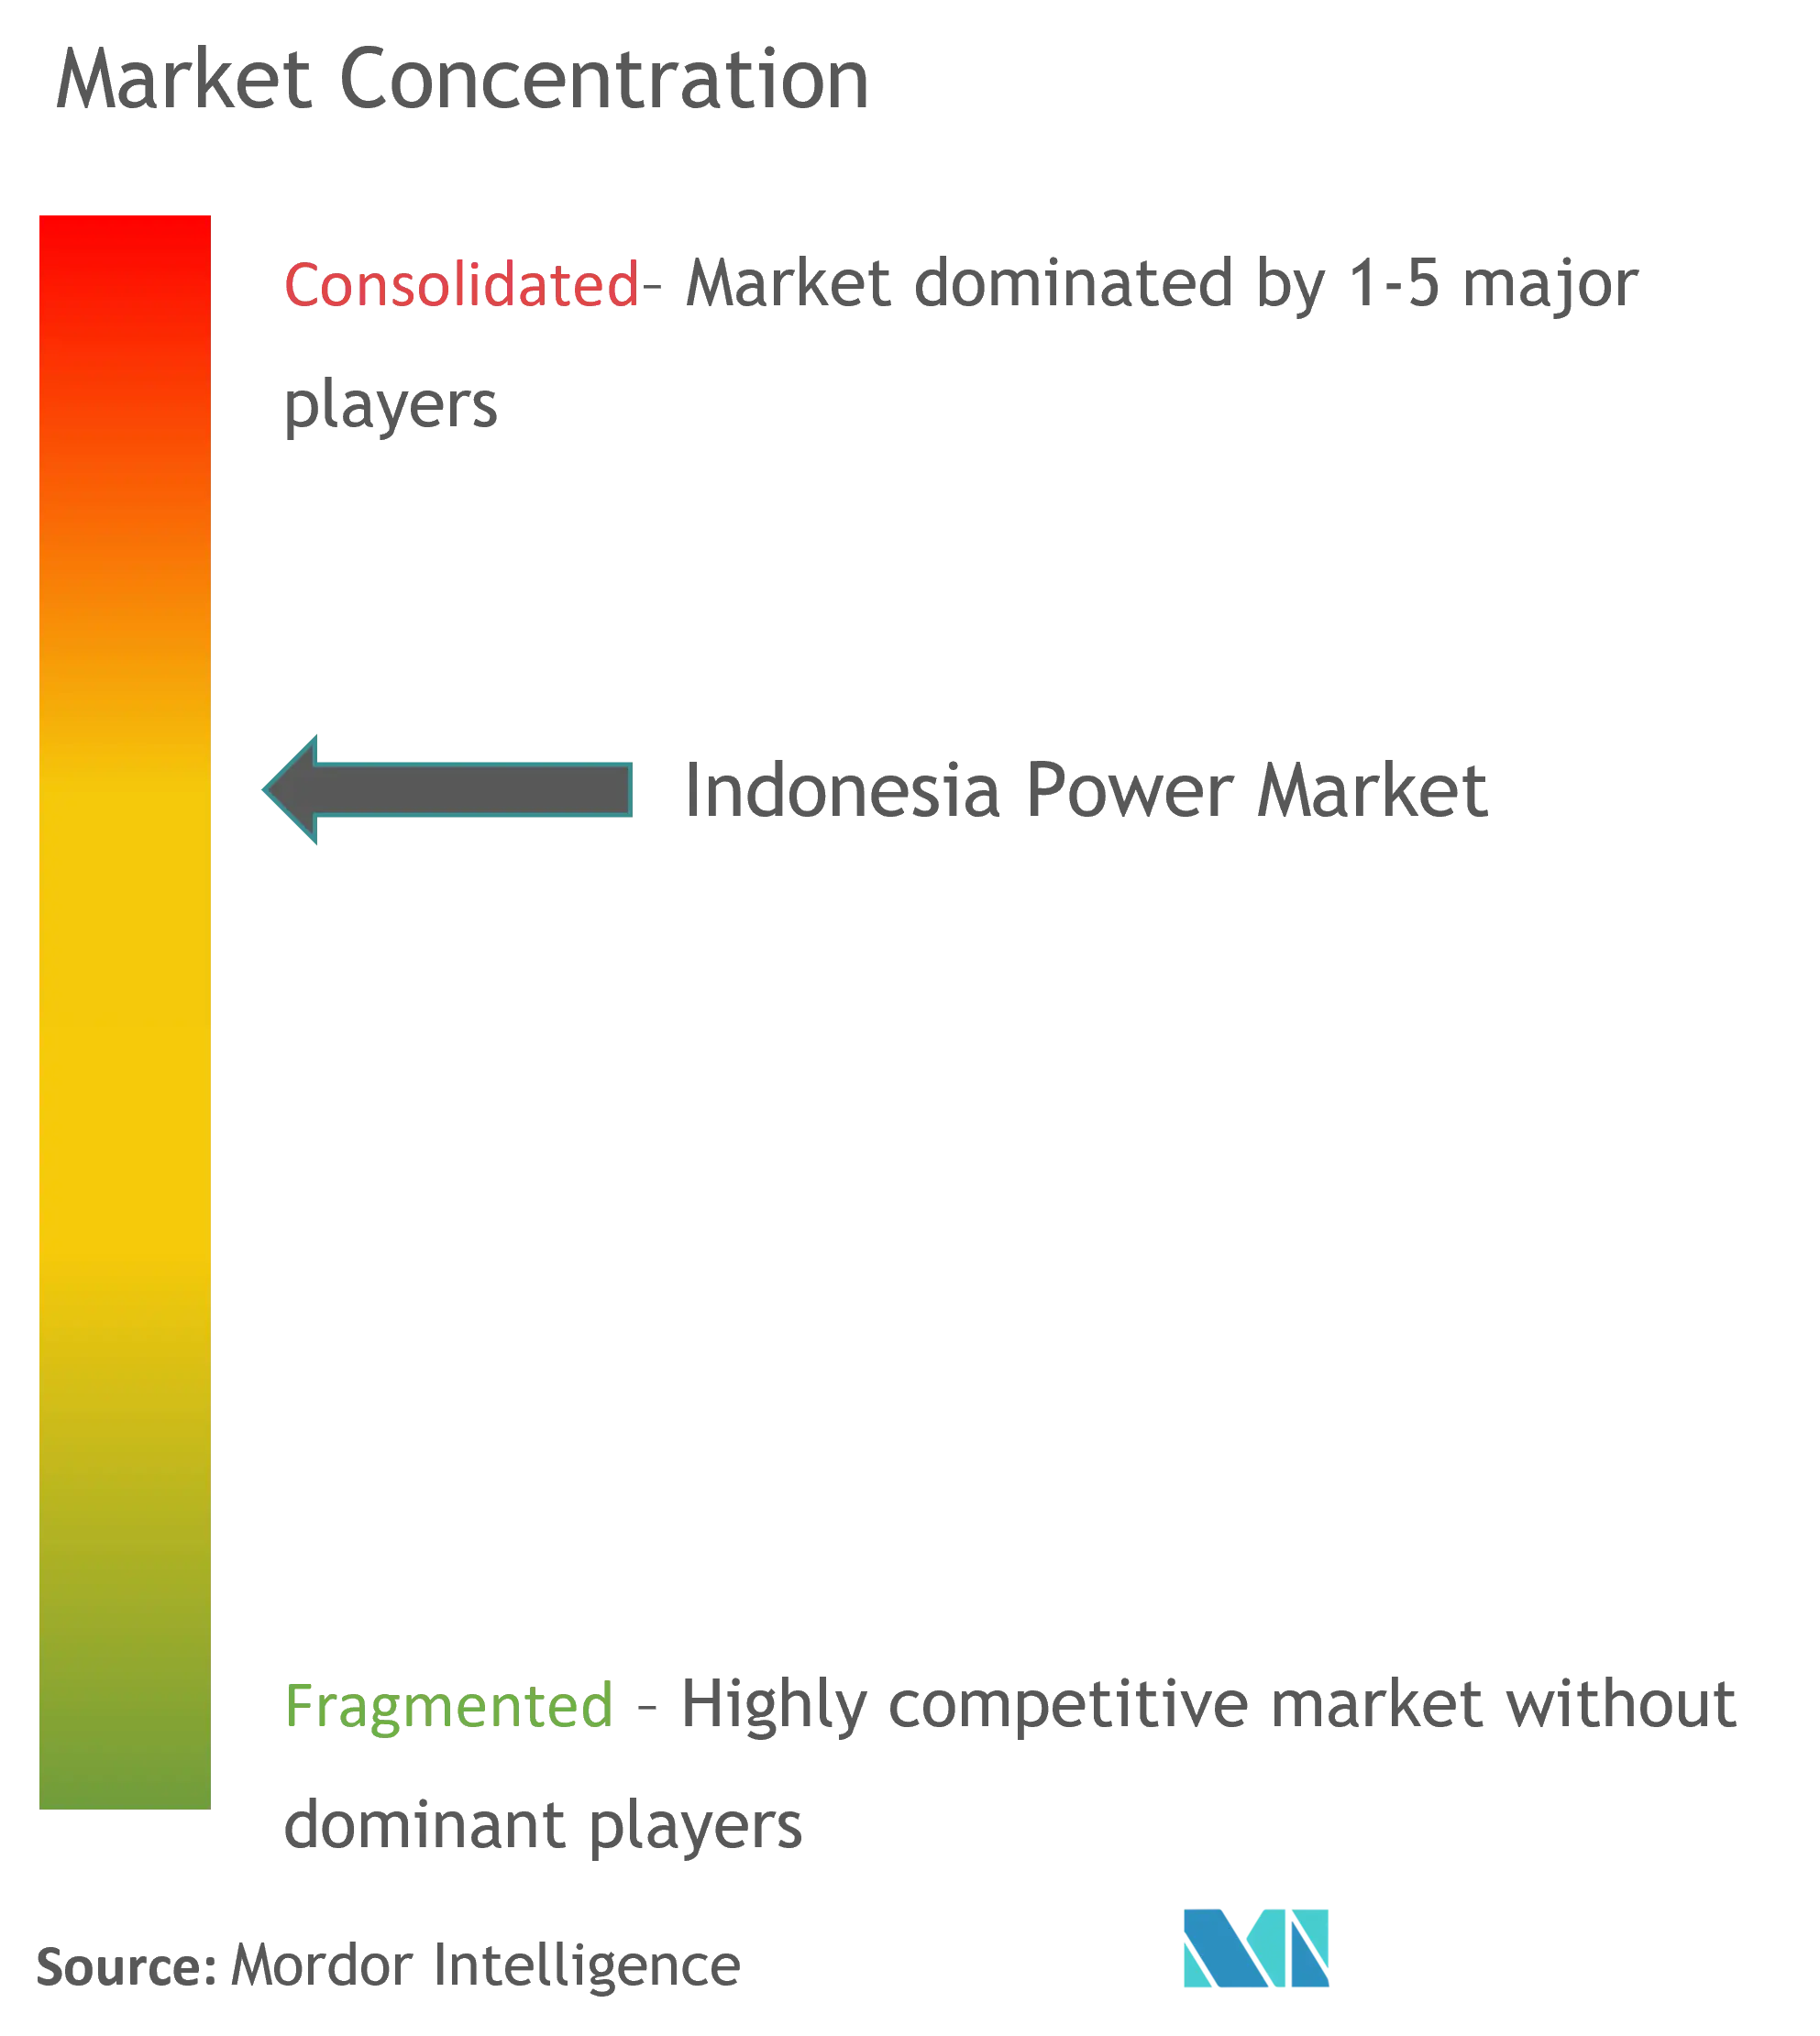 Market Concentration-Indonesia Power Market.png